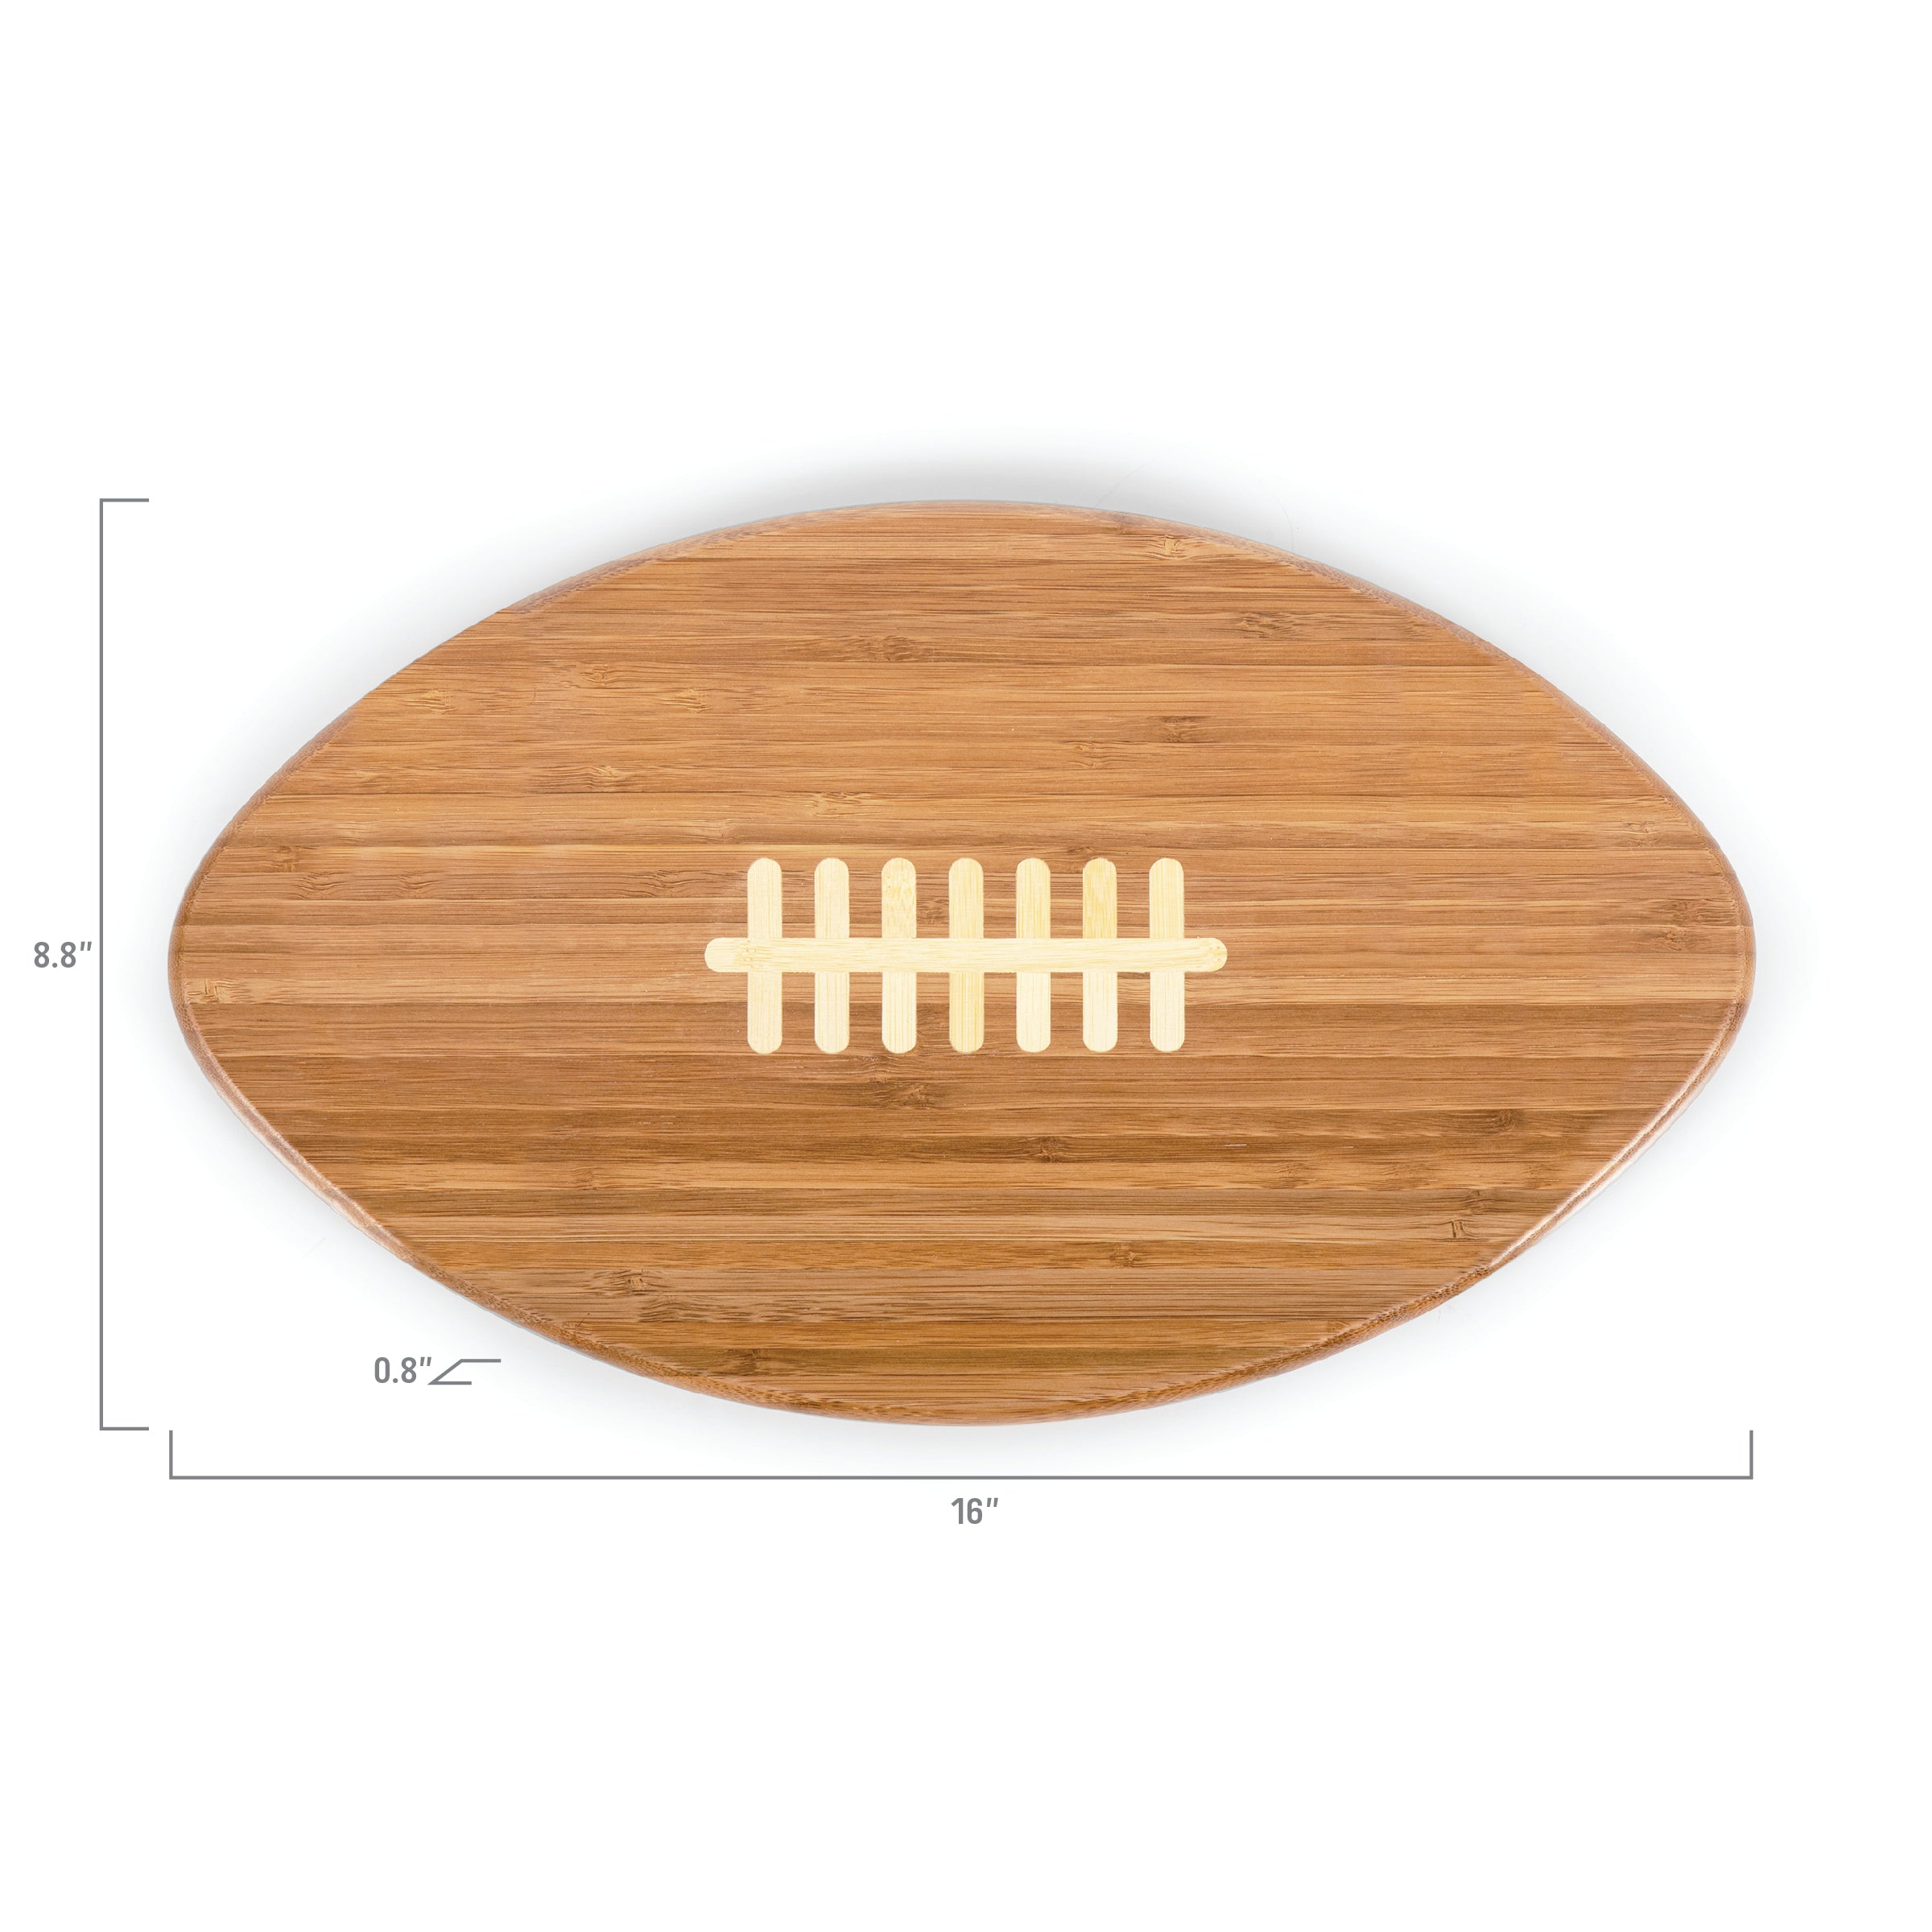 Houston Texans Mickey Mouse - Touchdown! Football Cutting Board & Serving Tray